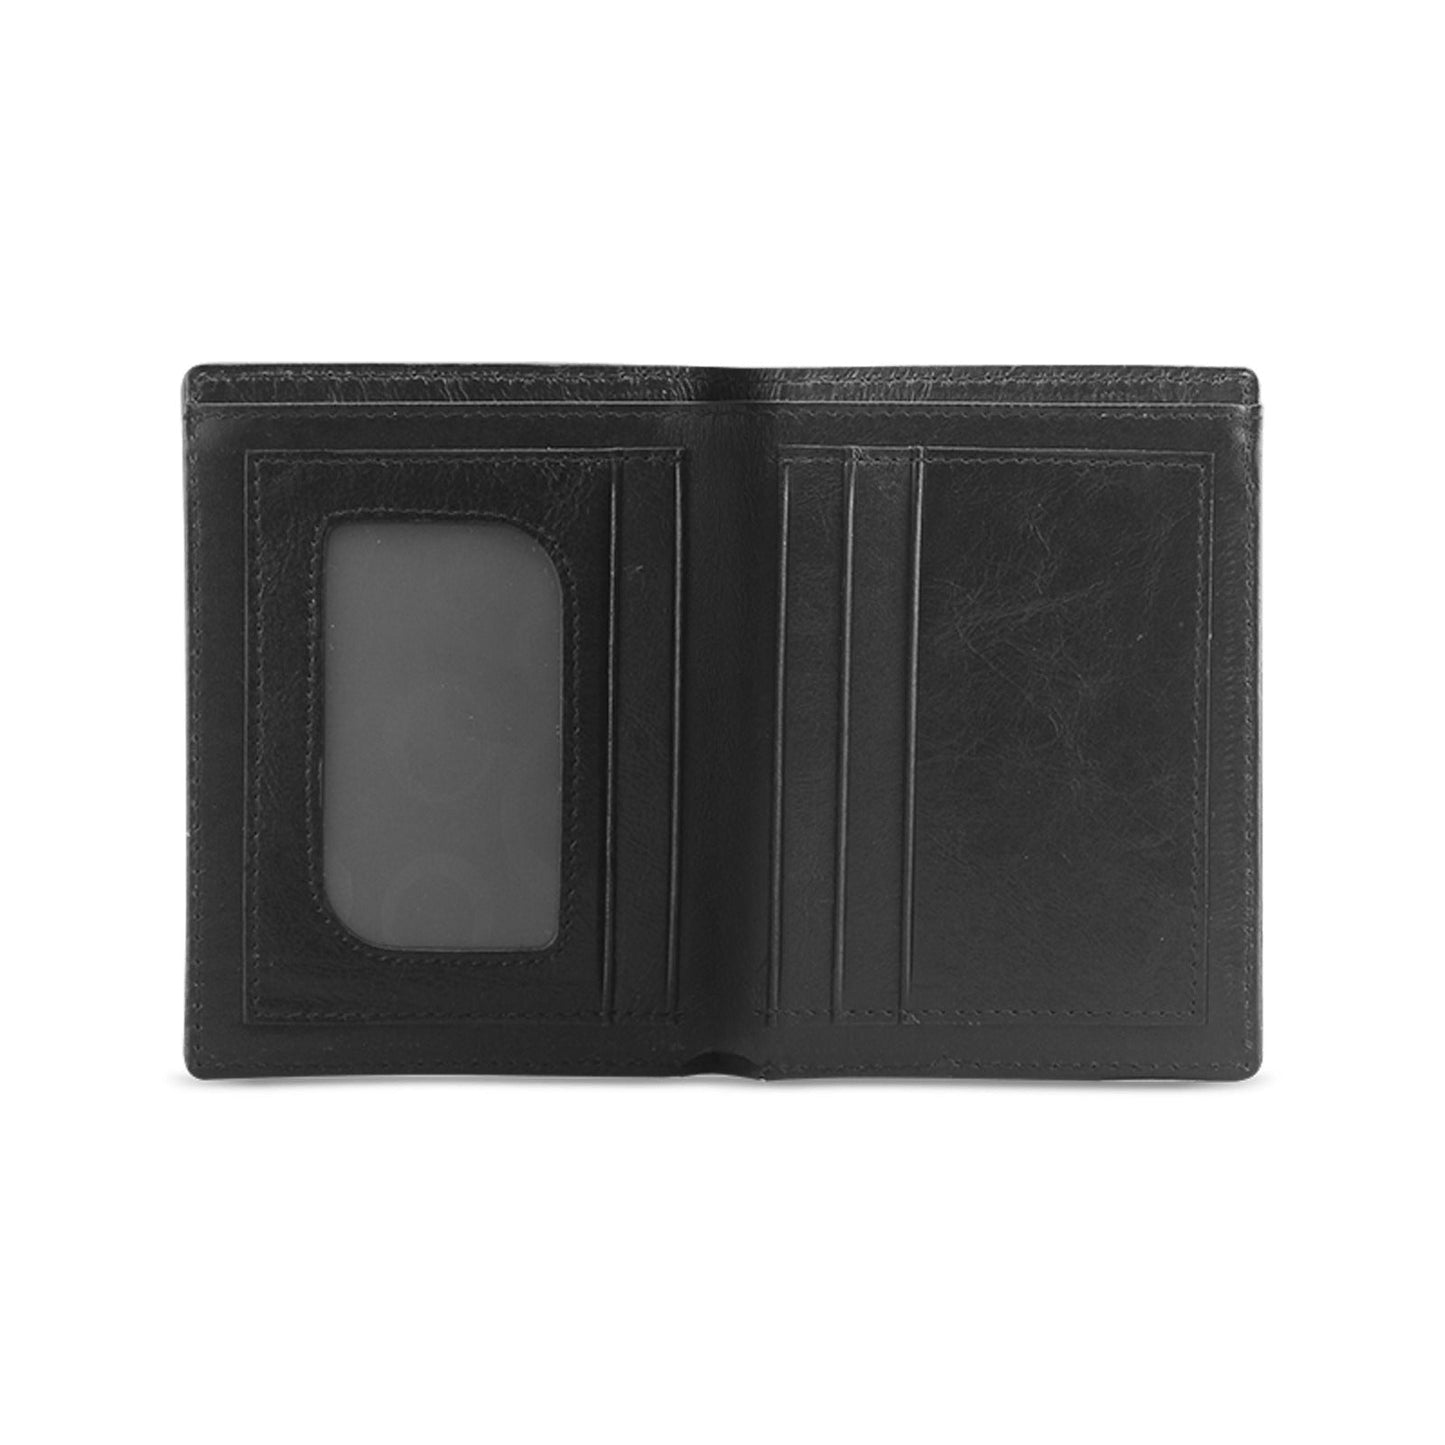 American Freedom Fighter PU Leather Wallet